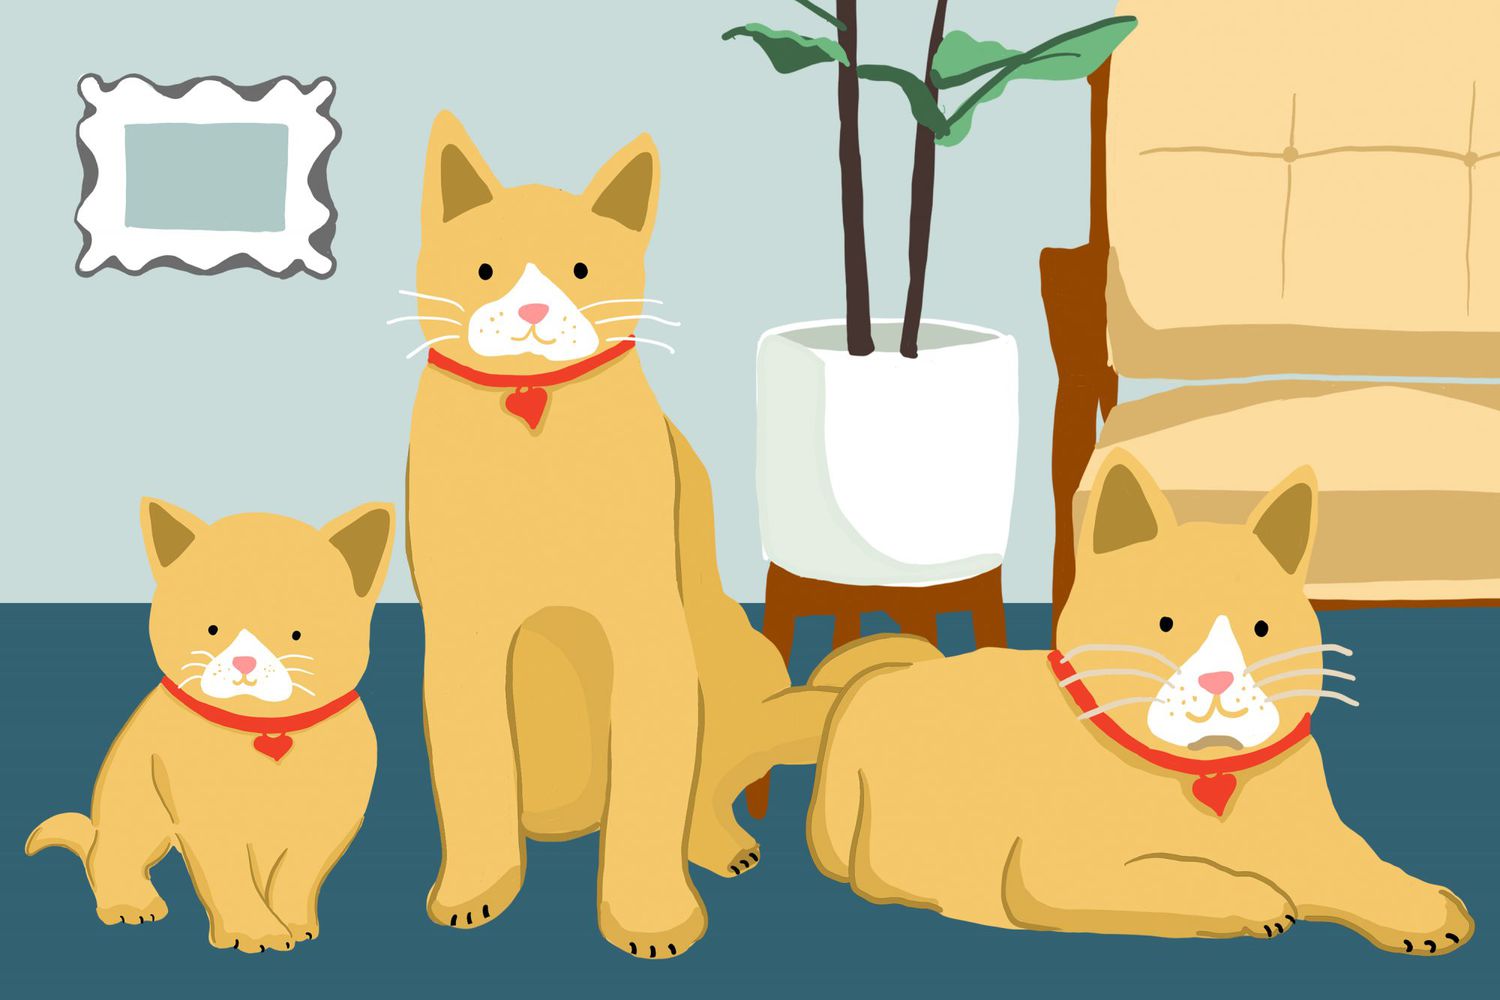 Illustration of three different cats at different ages